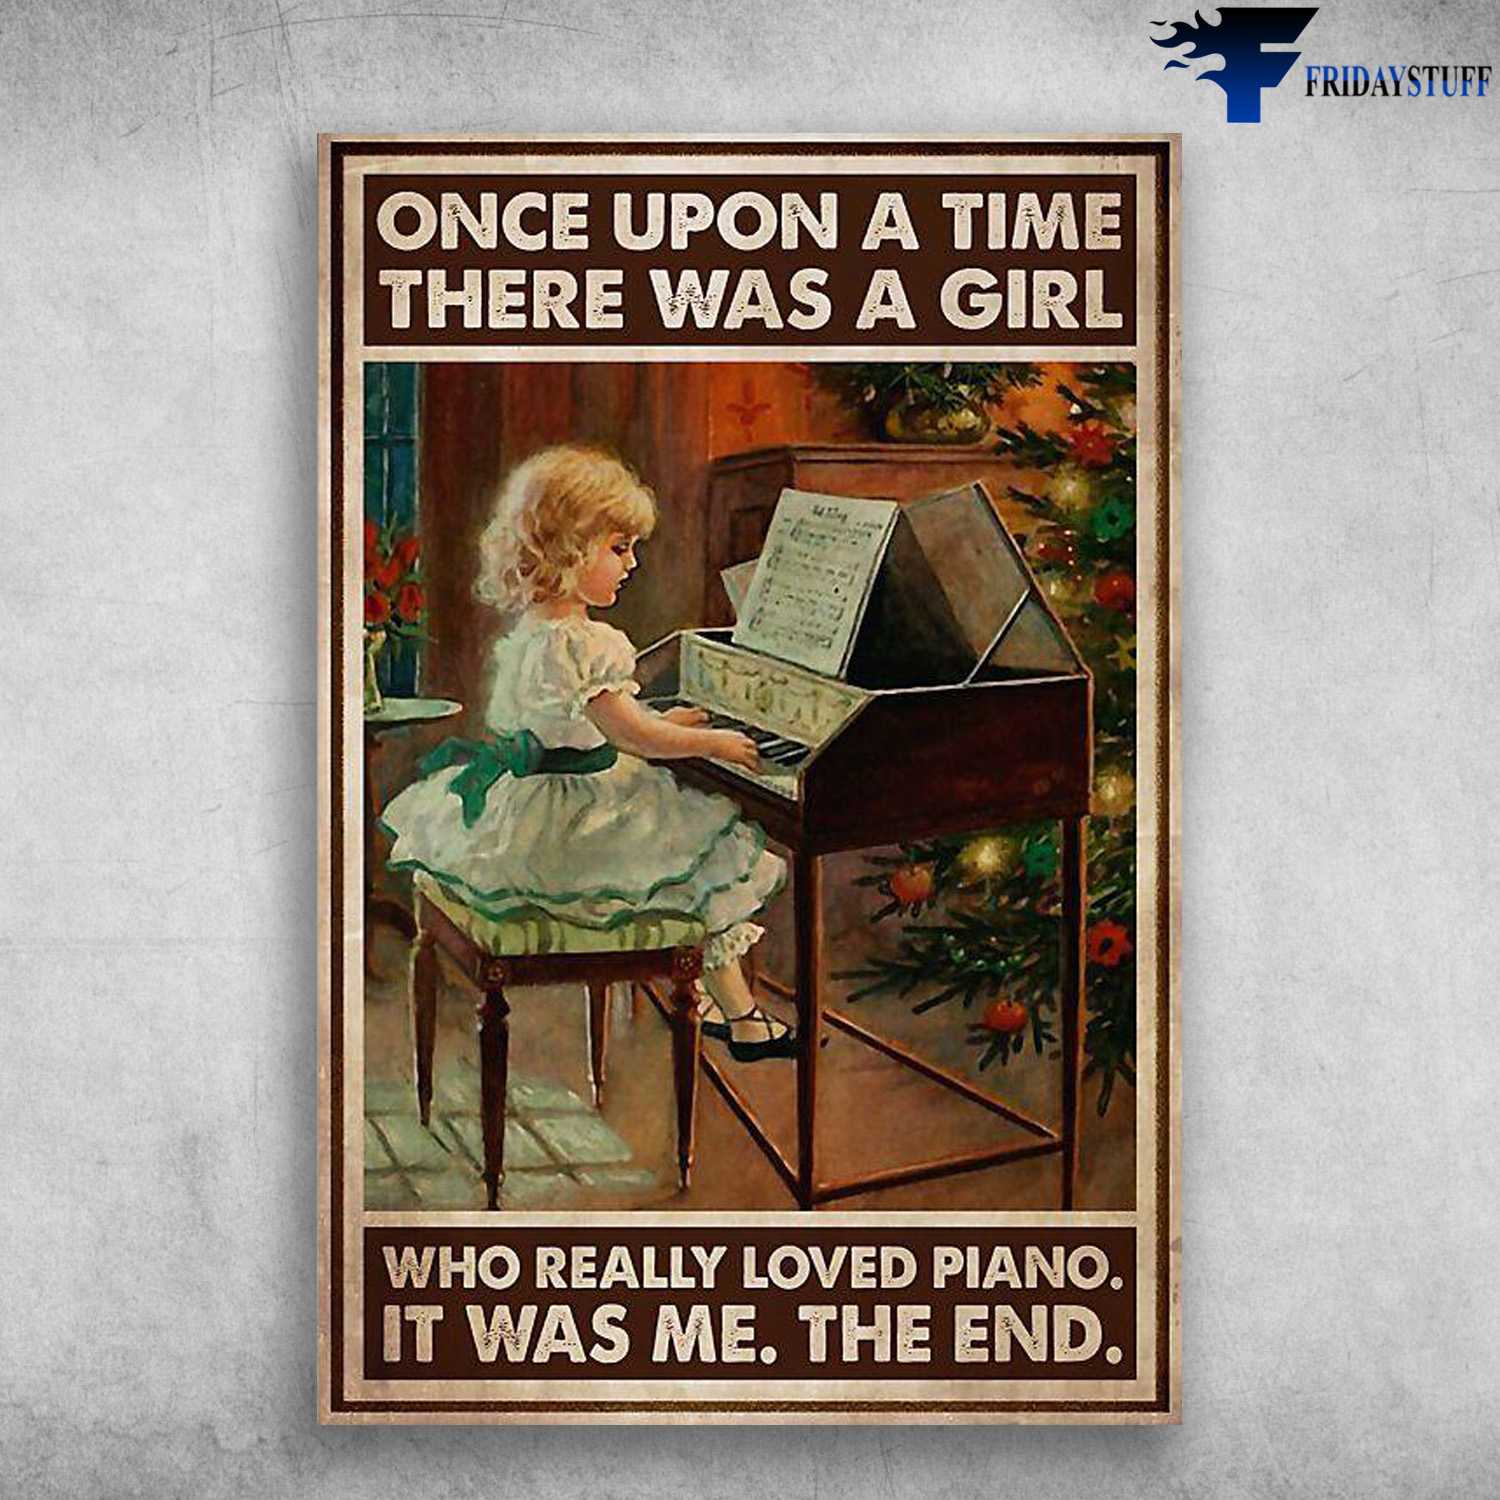 Piano Lover, Piano Practice, Once Upon A Time, There Was A Girl, Who Really Loved Piano, It Was Me, The End